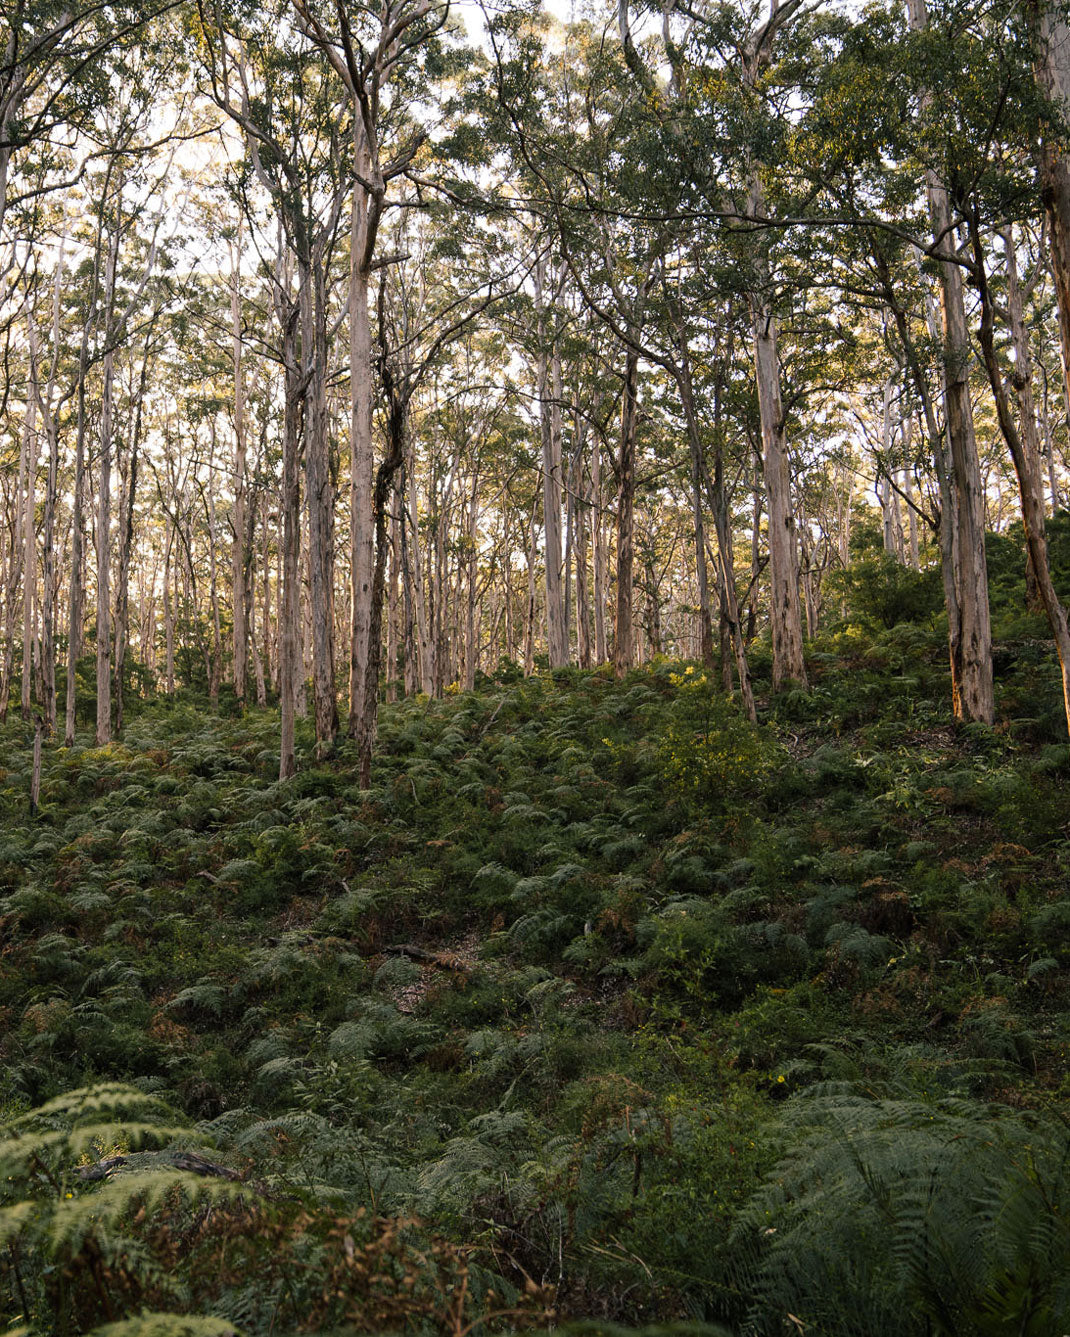 Boyanup forest in South Western Australia